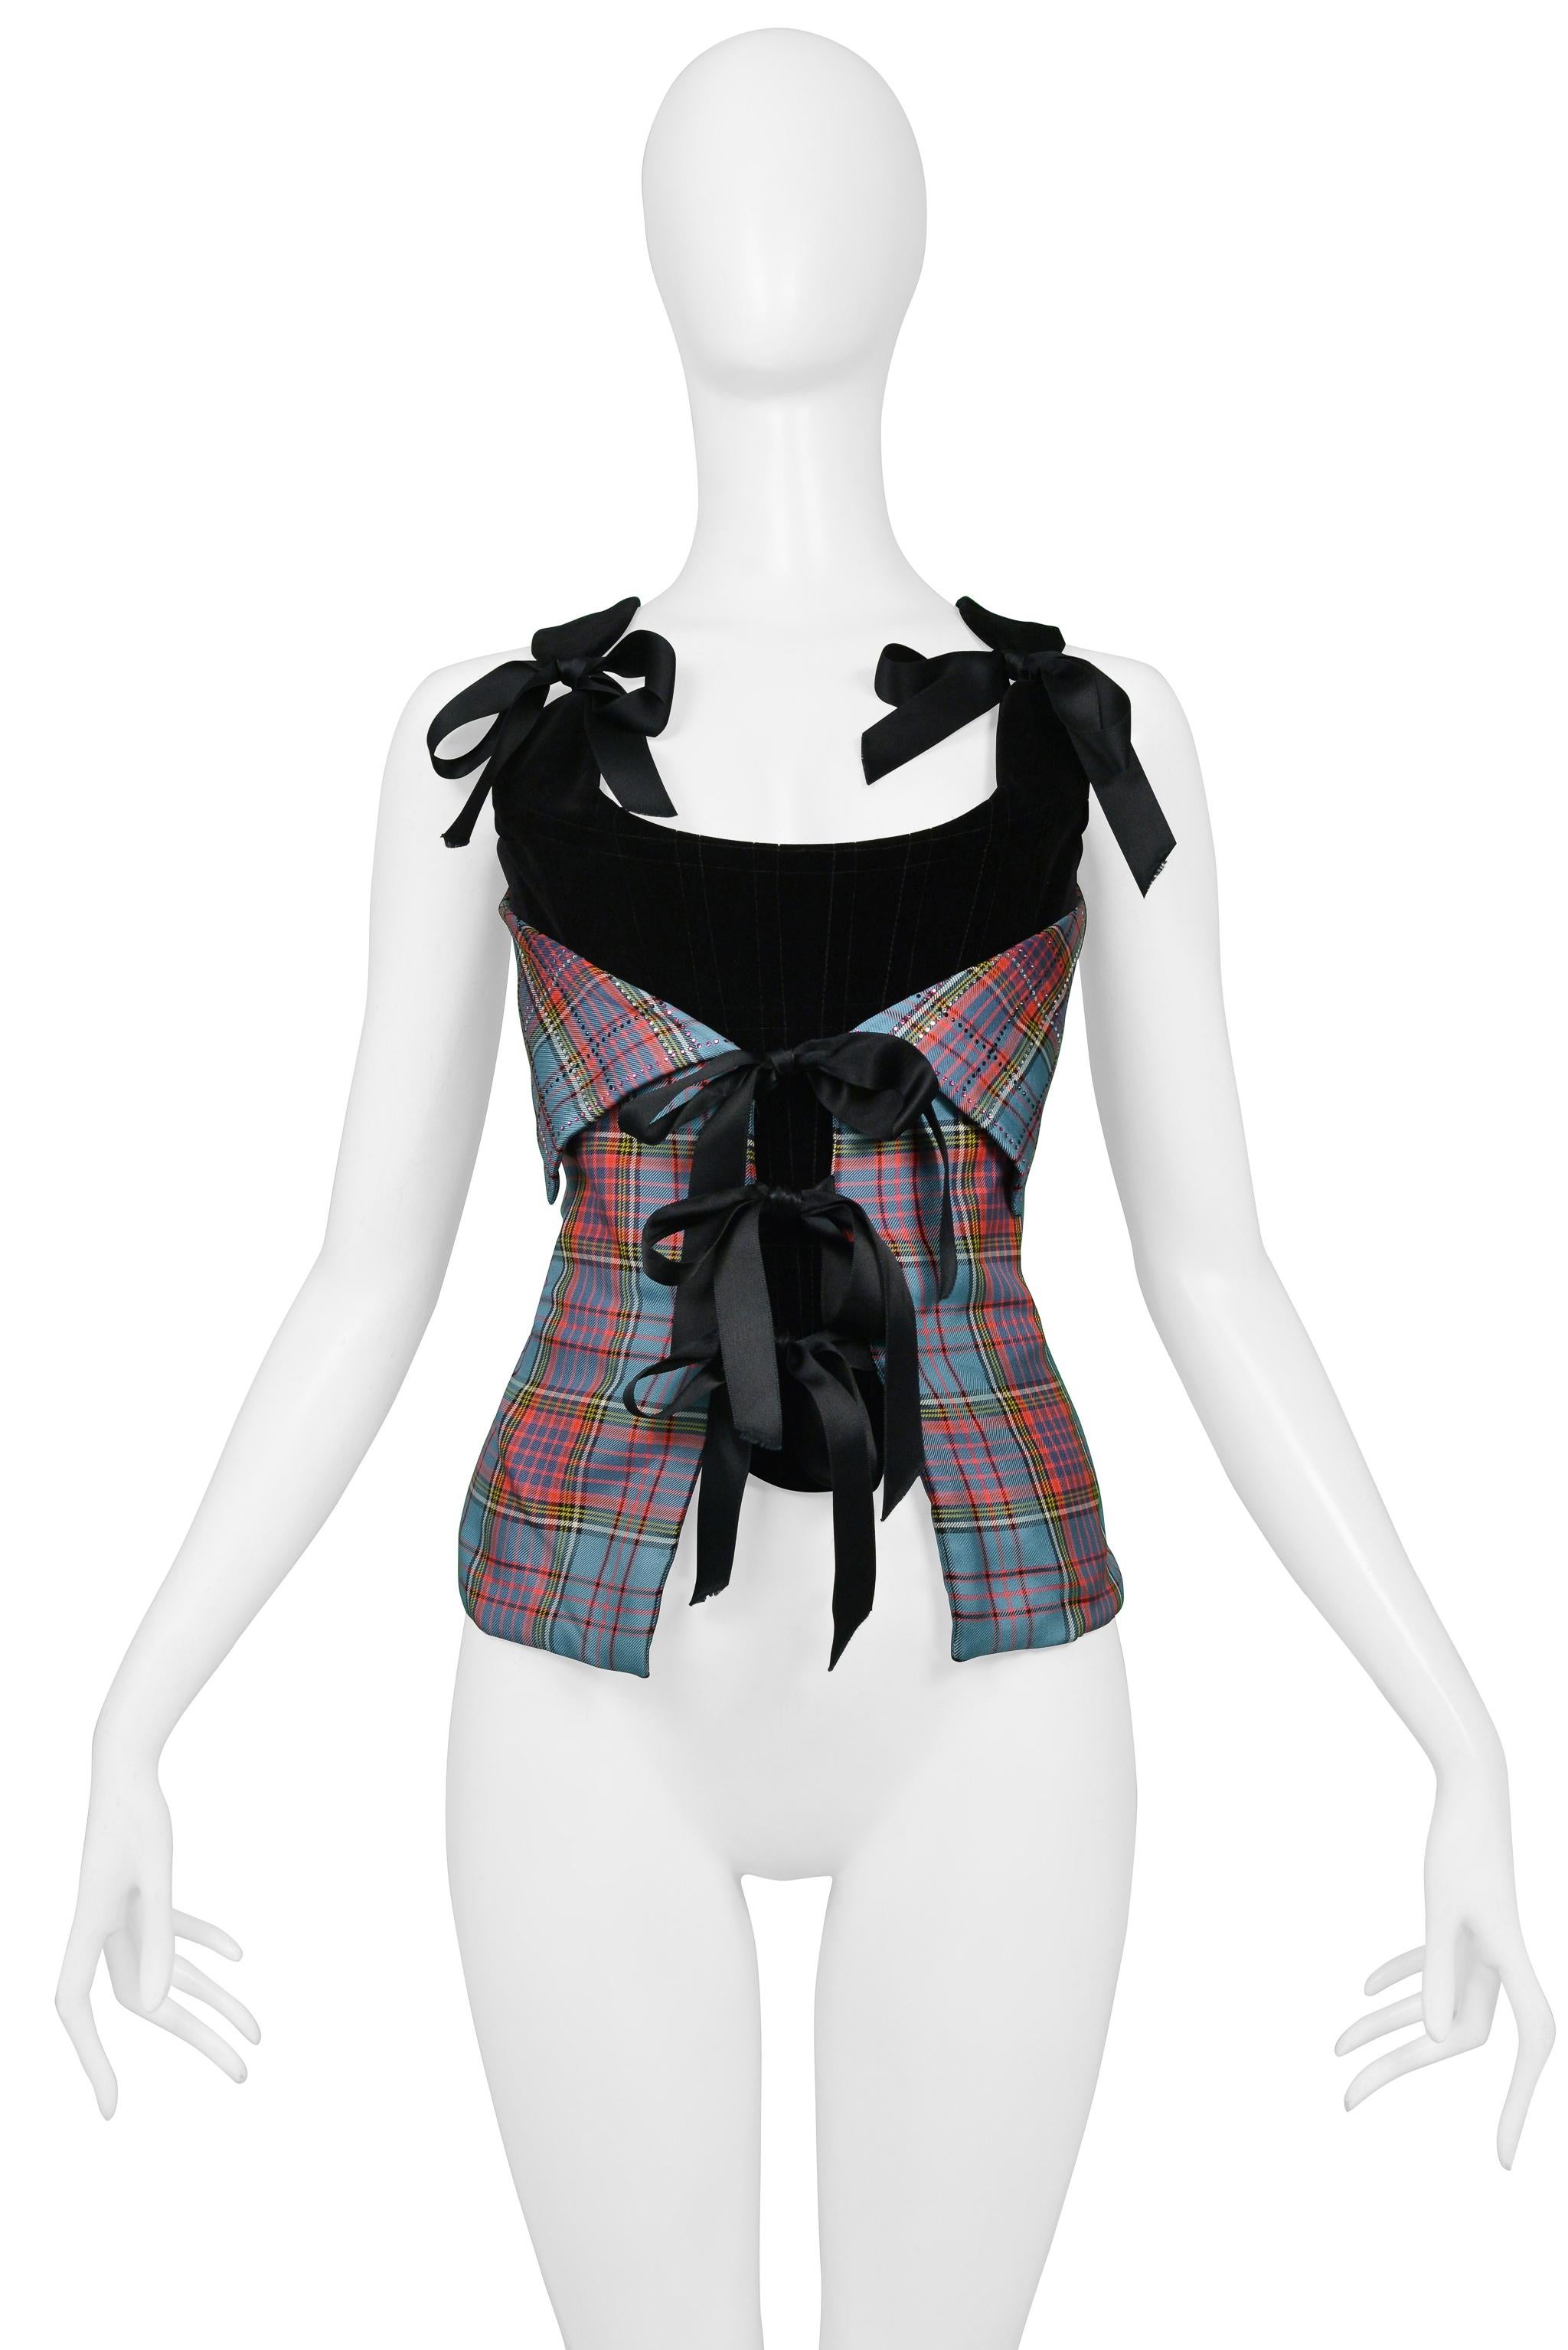 Vivienne Westwood Black Velvet Corset With Macandreas Plaid & Rhinestone 1993 In Excellent Condition For Sale In Los Angeles, CA